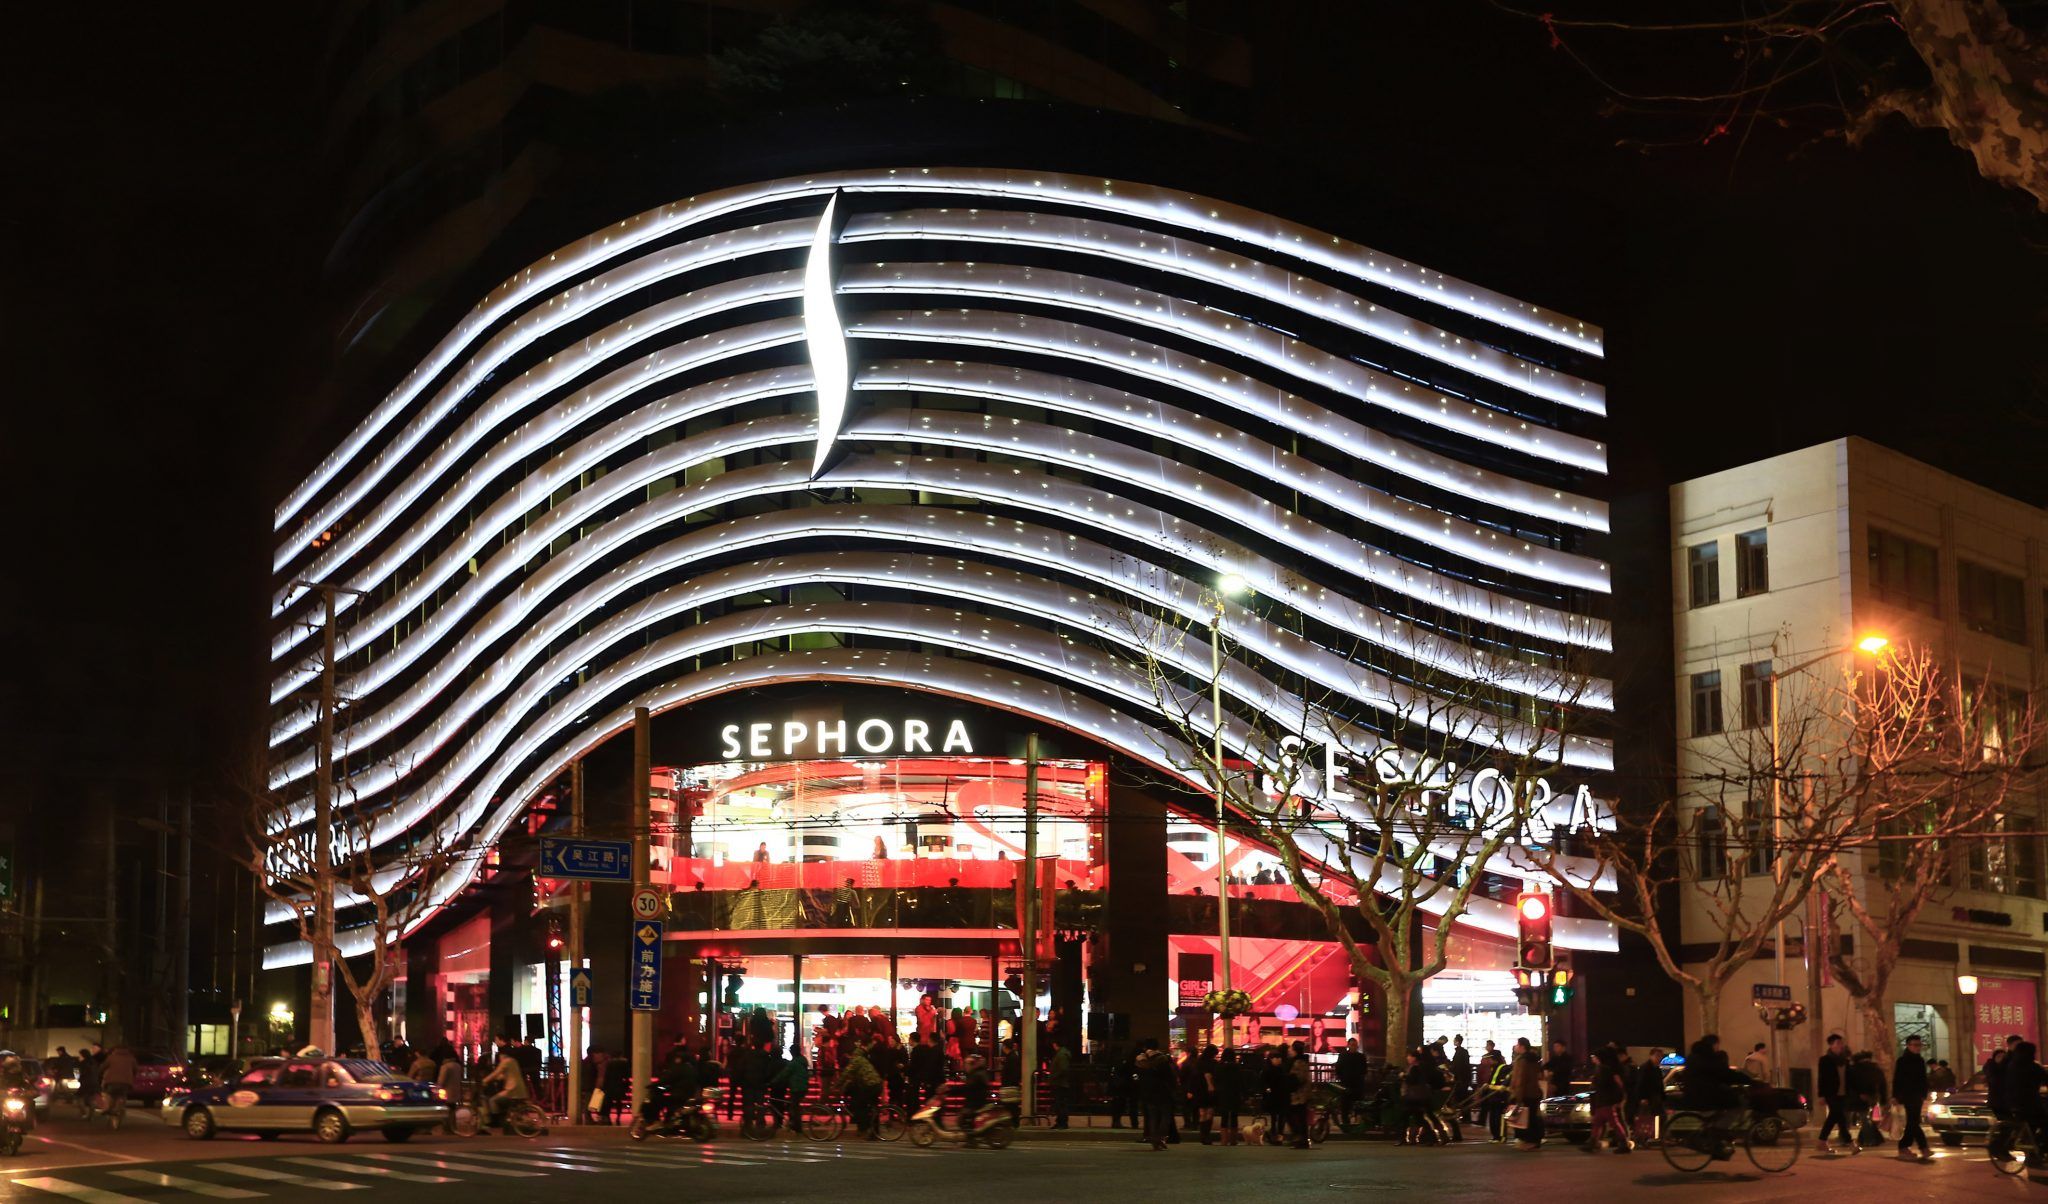 Exclusive: With Sephora Event, LVMH Adds China to its Global ‘Open House’ Program